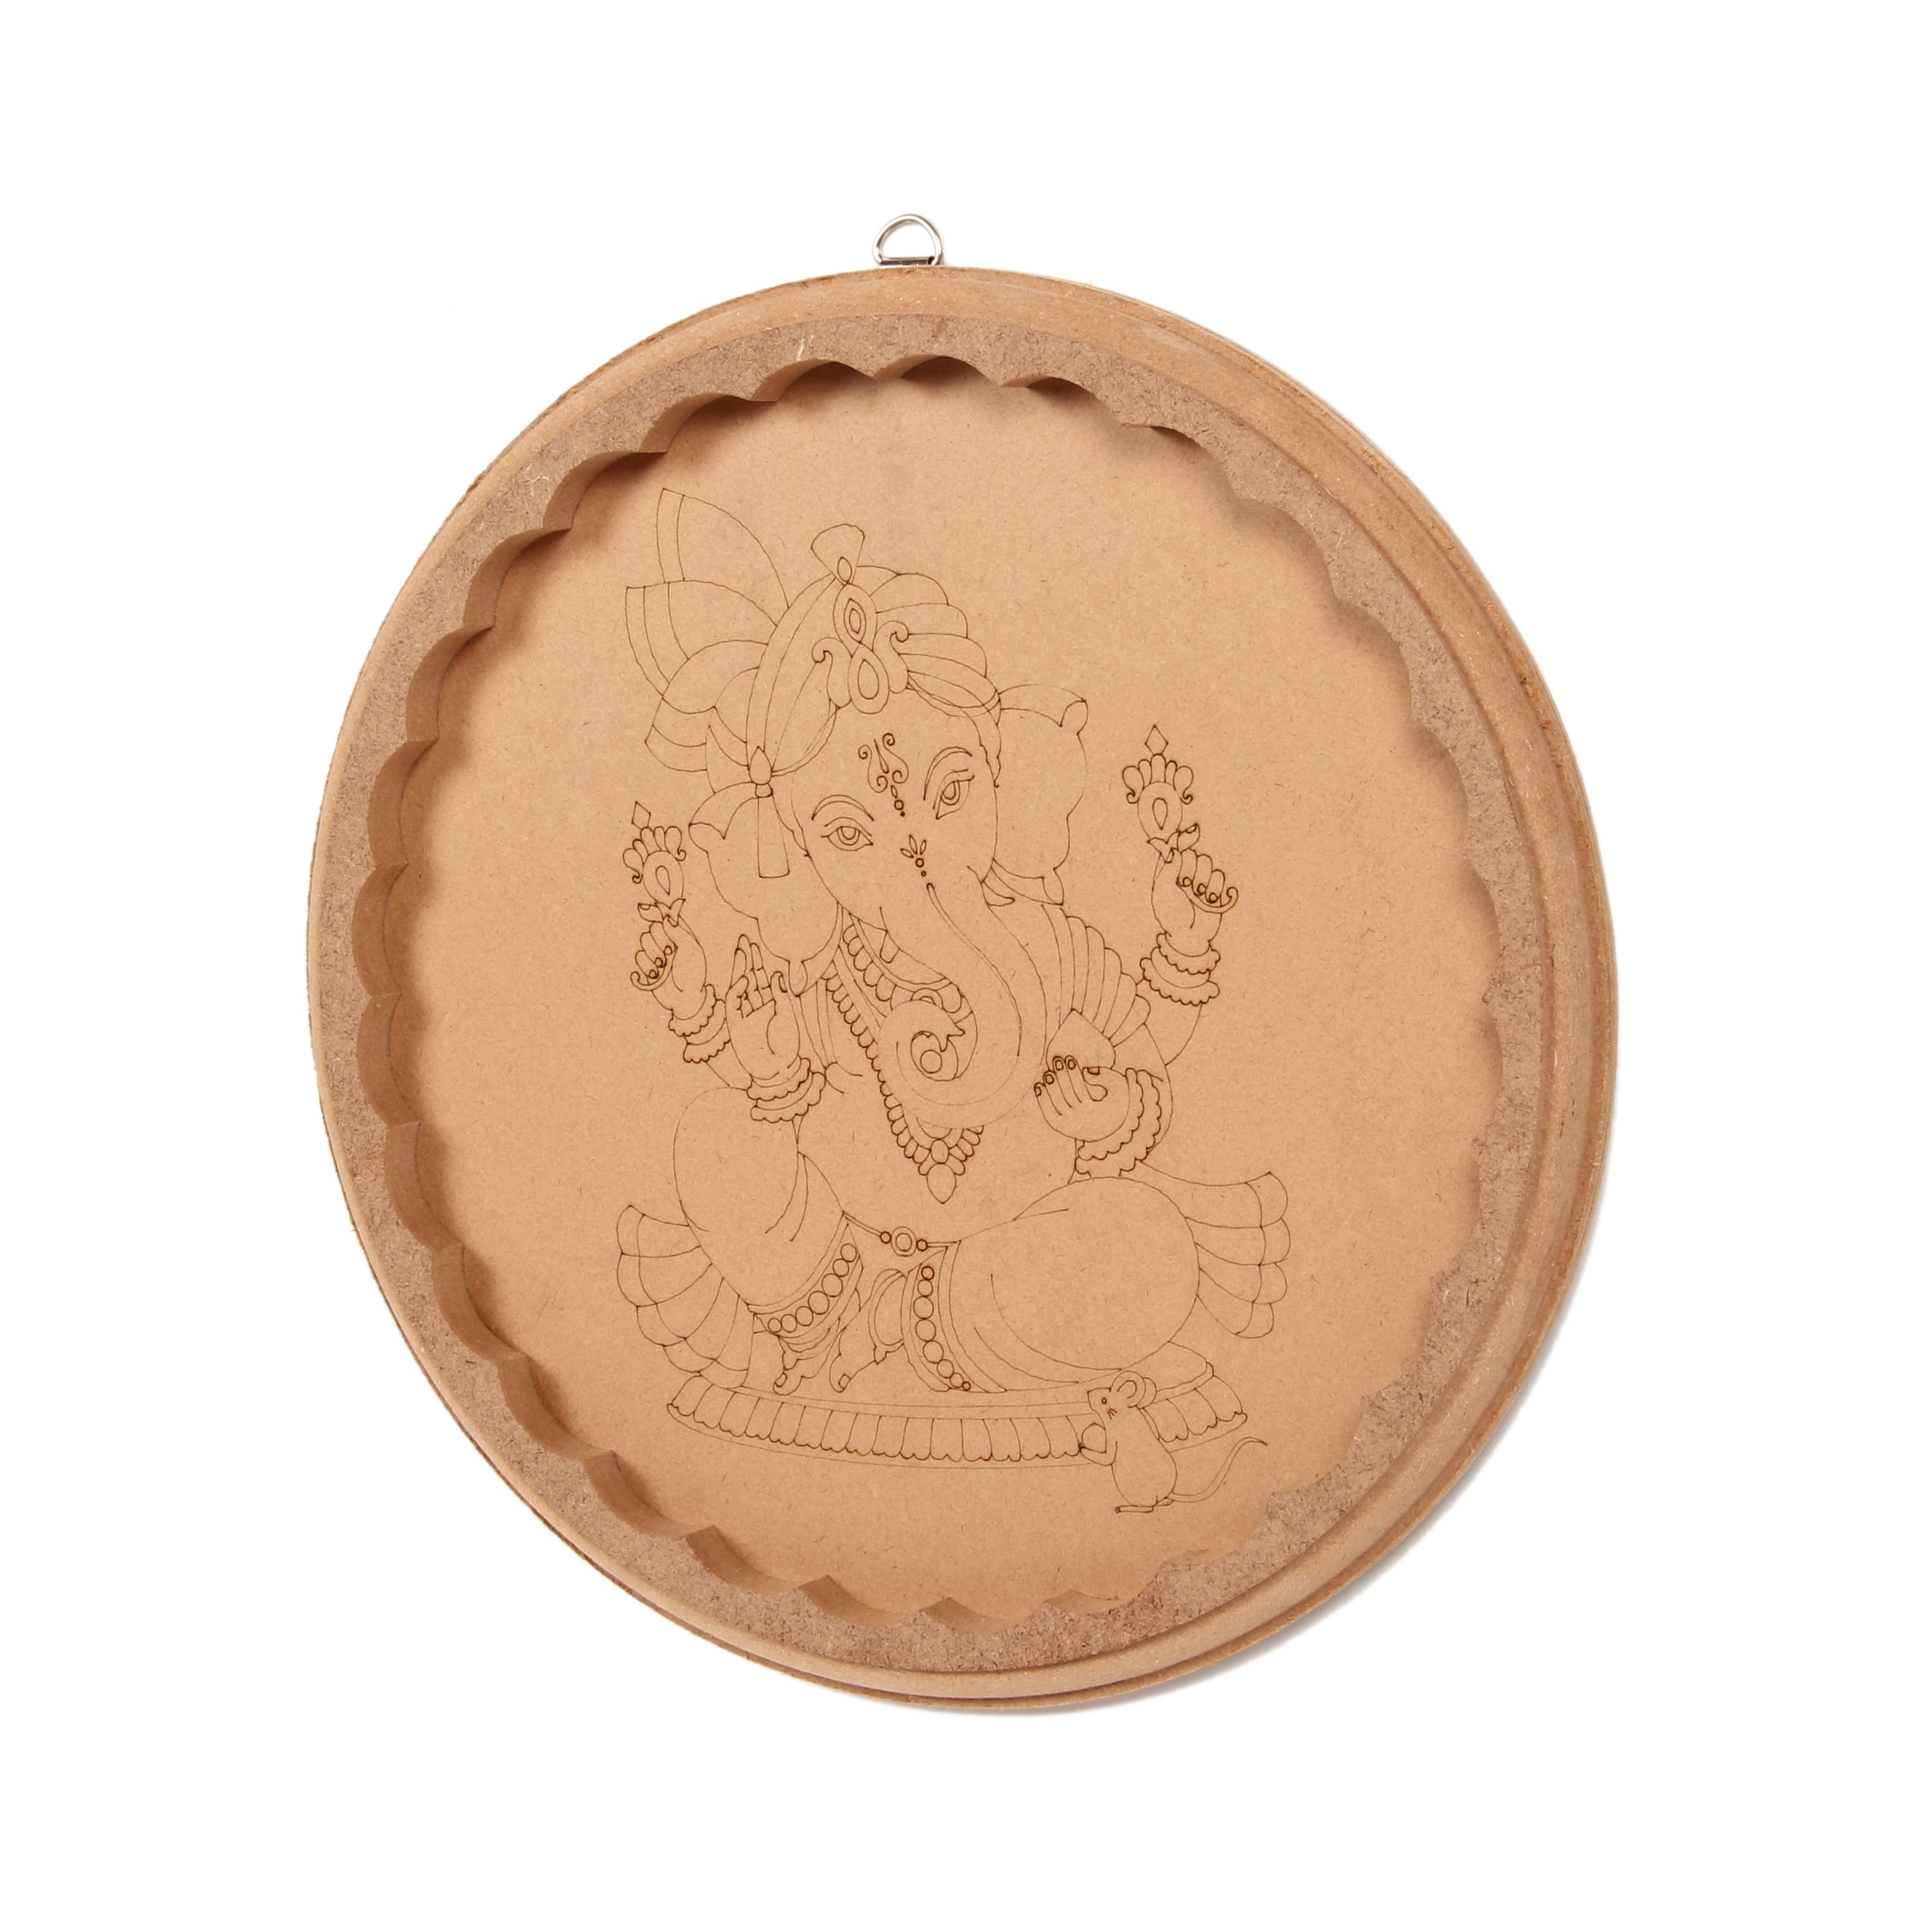 Mdf Pre Marked Charming Ganesha With D Ring Hanging Hook 6Inch Dia 1Pc Lb